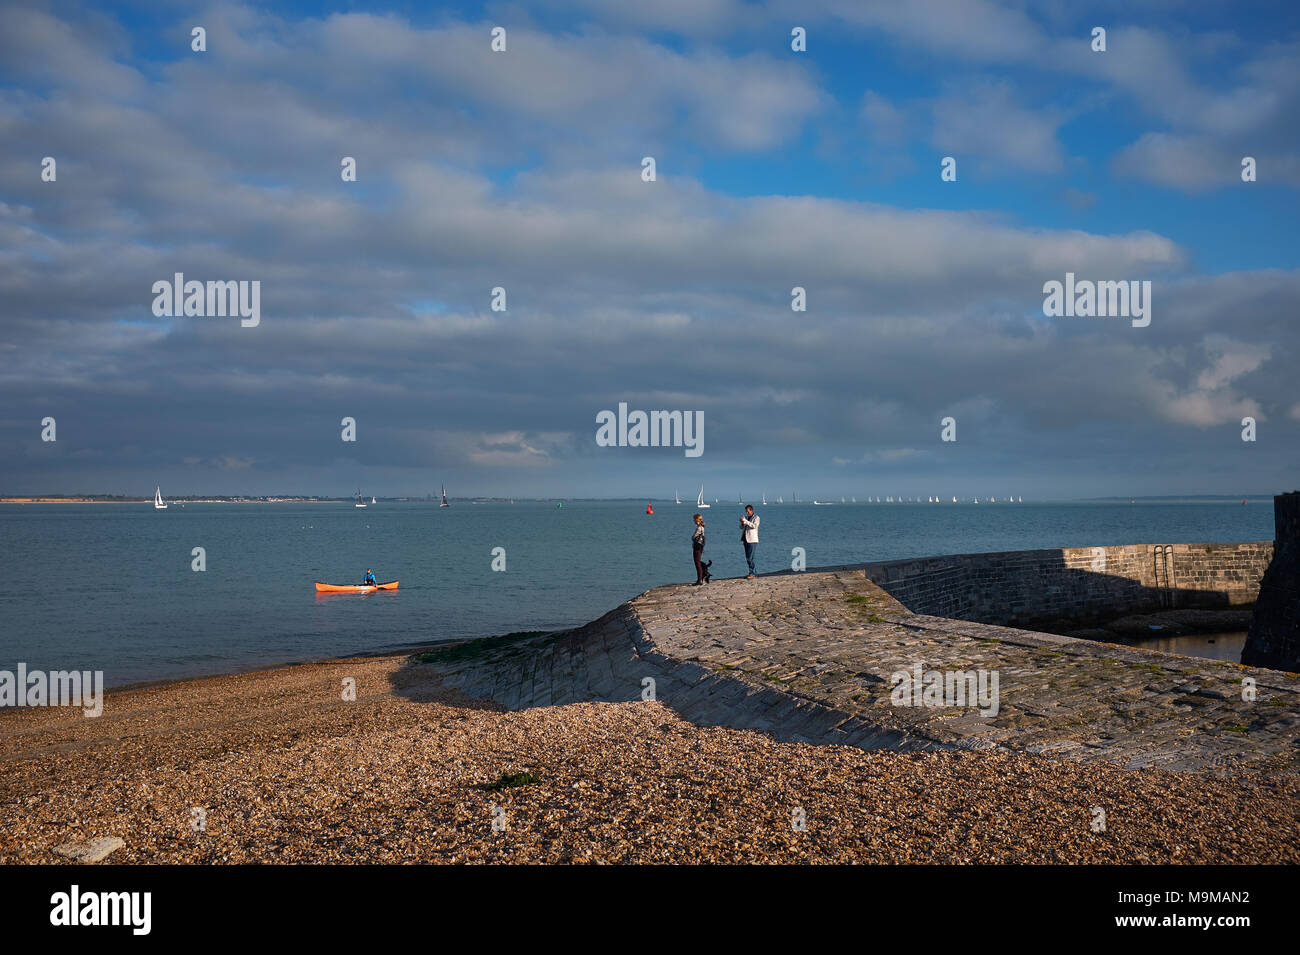 Two people watching a single canoe traveling along the Solent in the English Channel from Calshot beach, UK, with sailing boats in the background Stock Photo